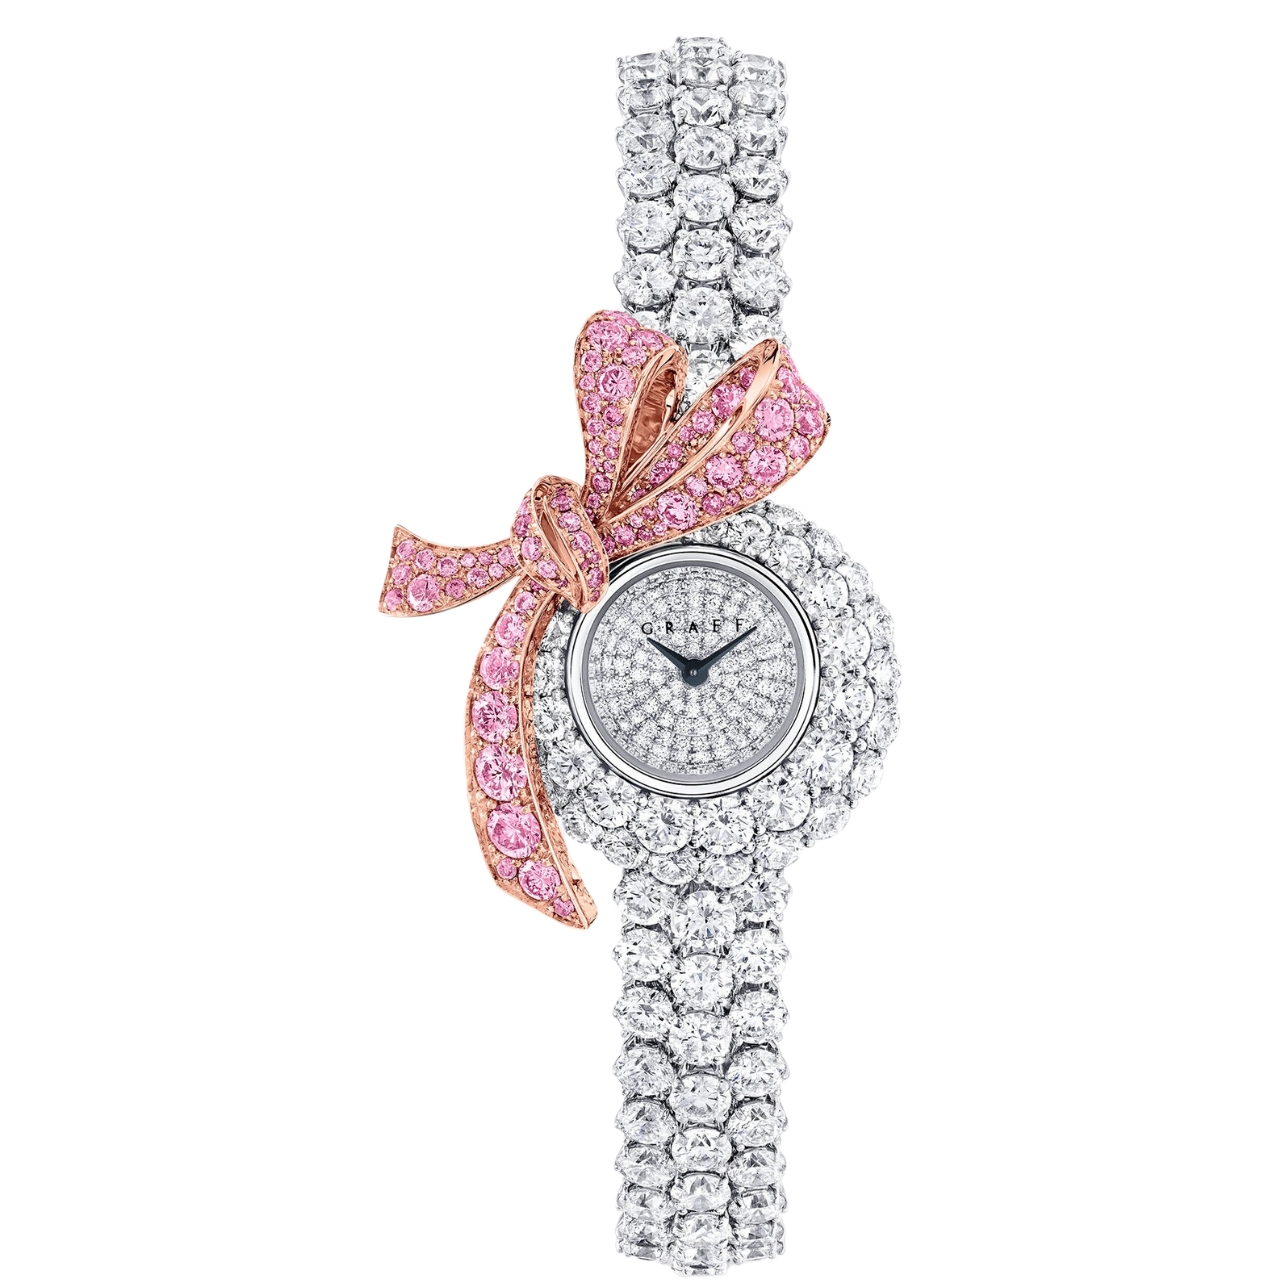 Graff tilda’s bow collection diamond watch with rose gold bow